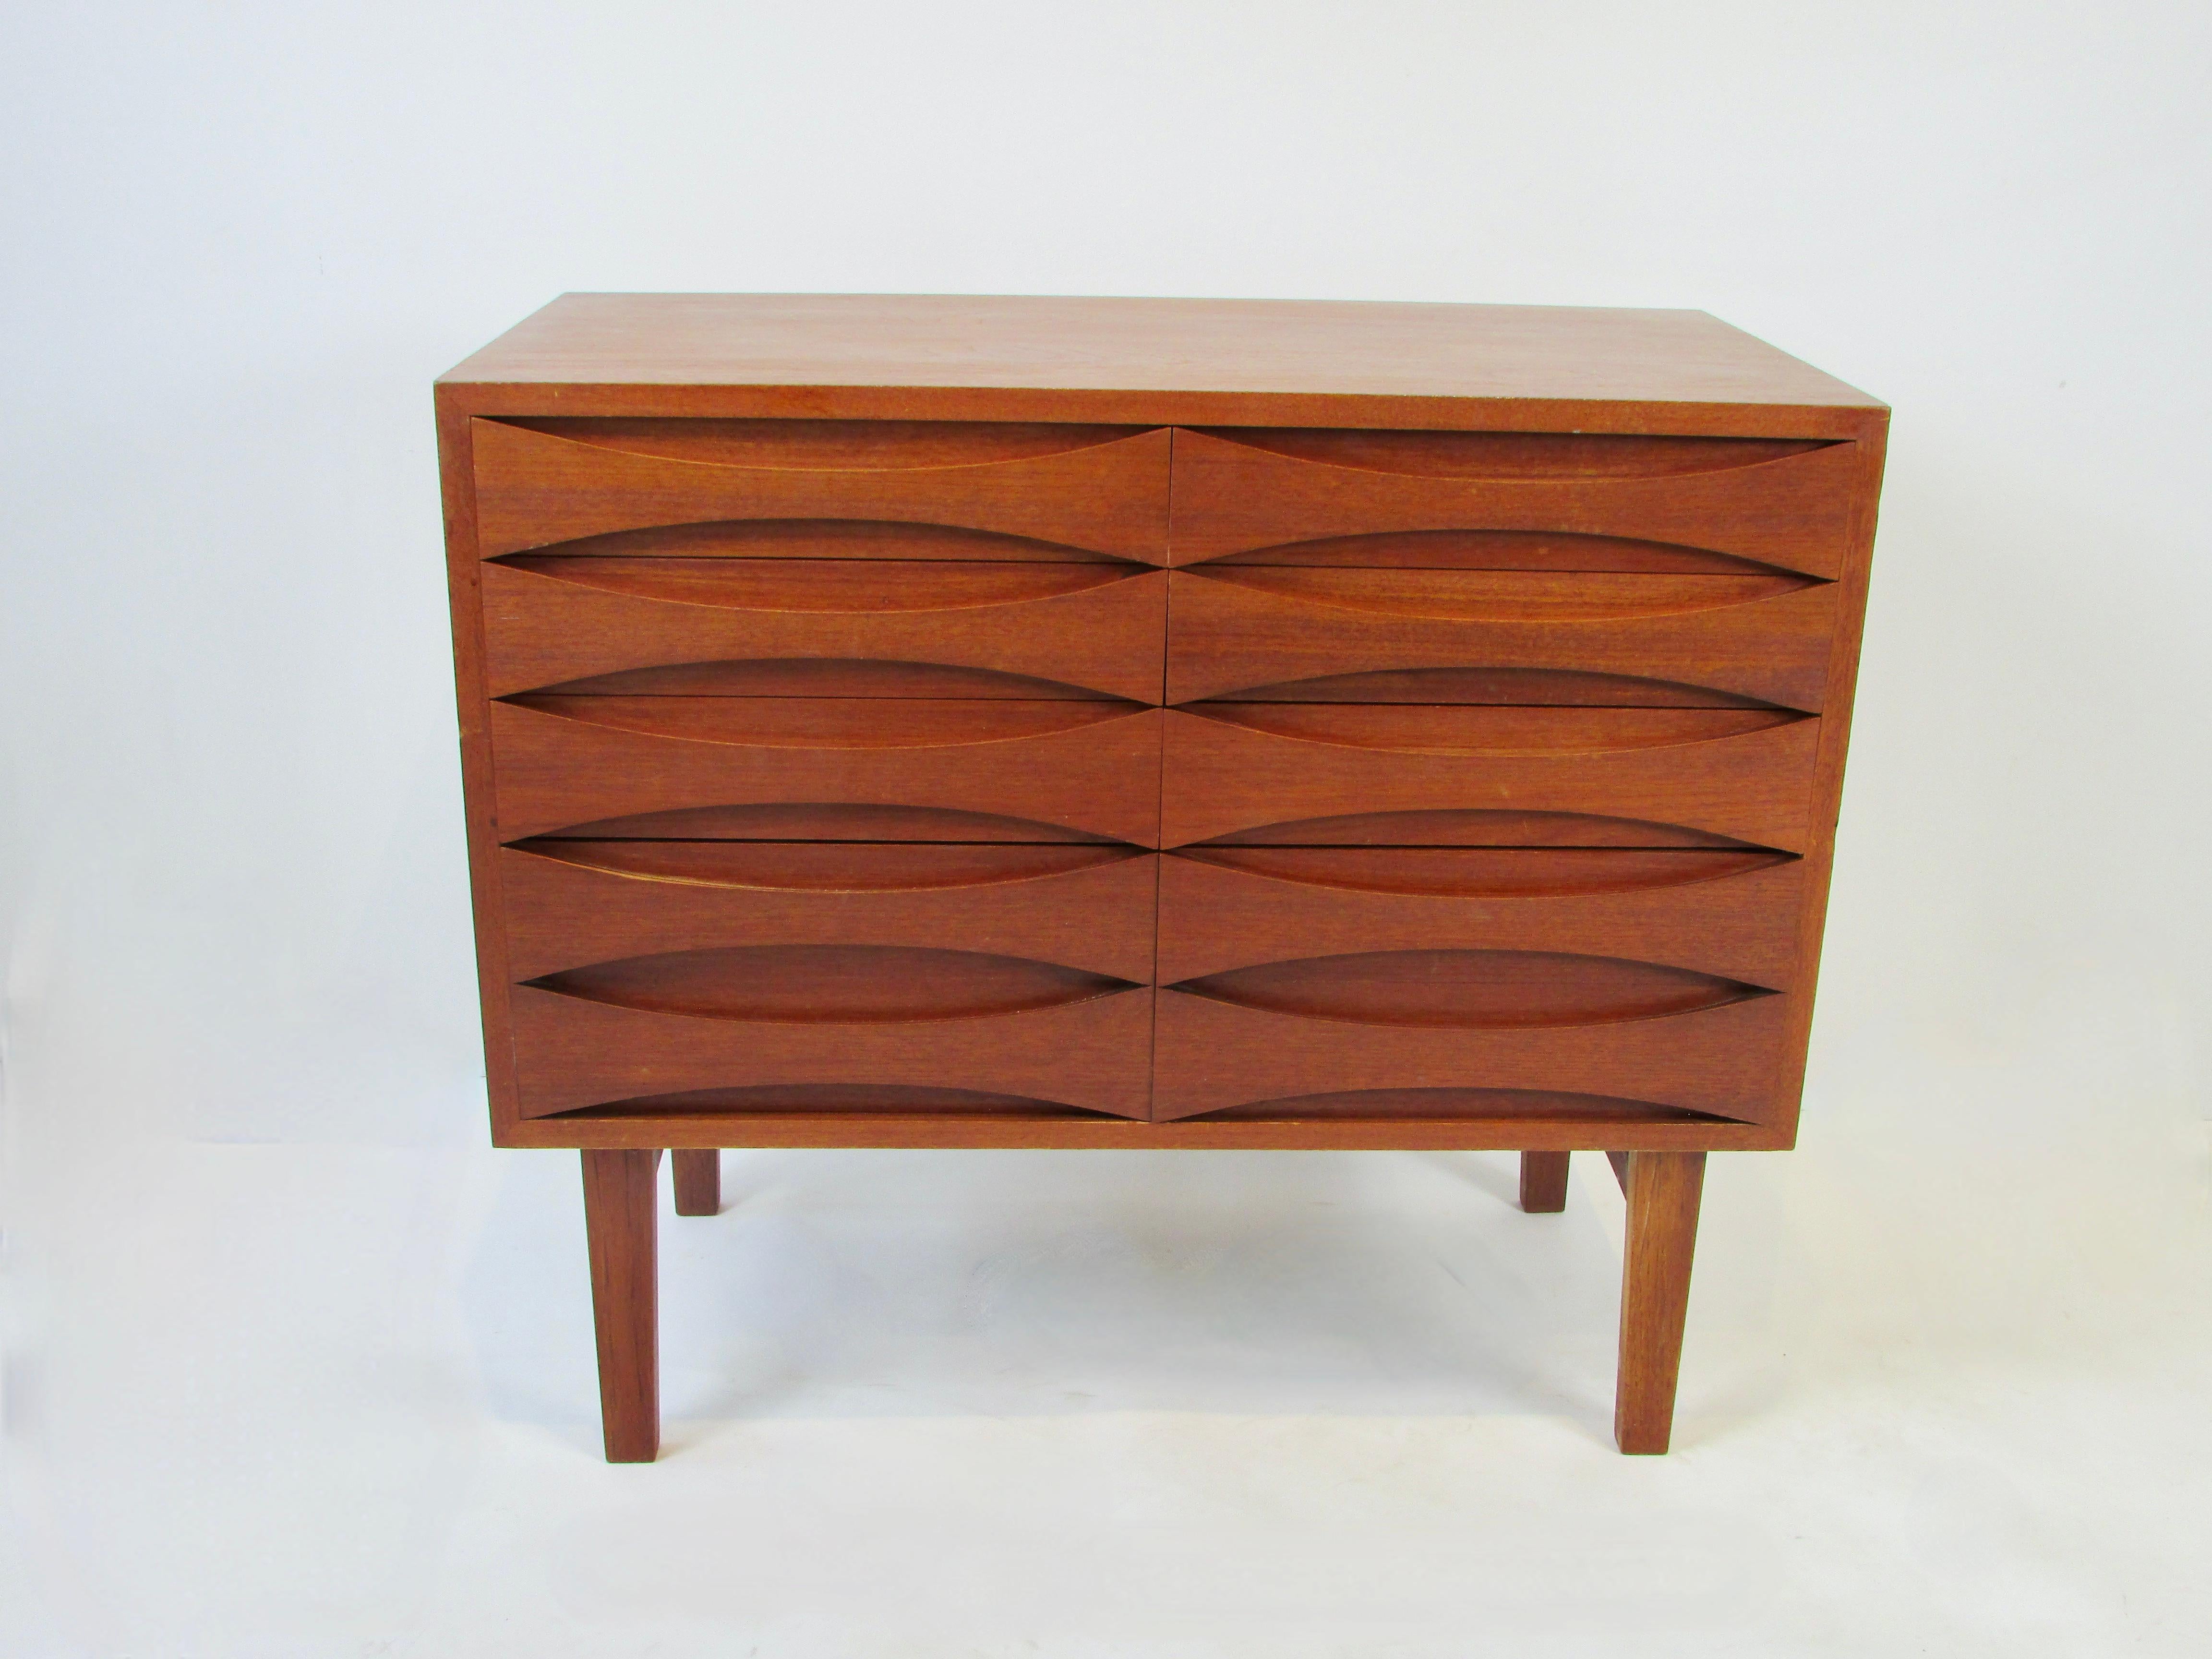 Diminutive Niels Clausen Danish Teak Chest for NC Mobler In Good Condition For Sale In Ferndale, MI